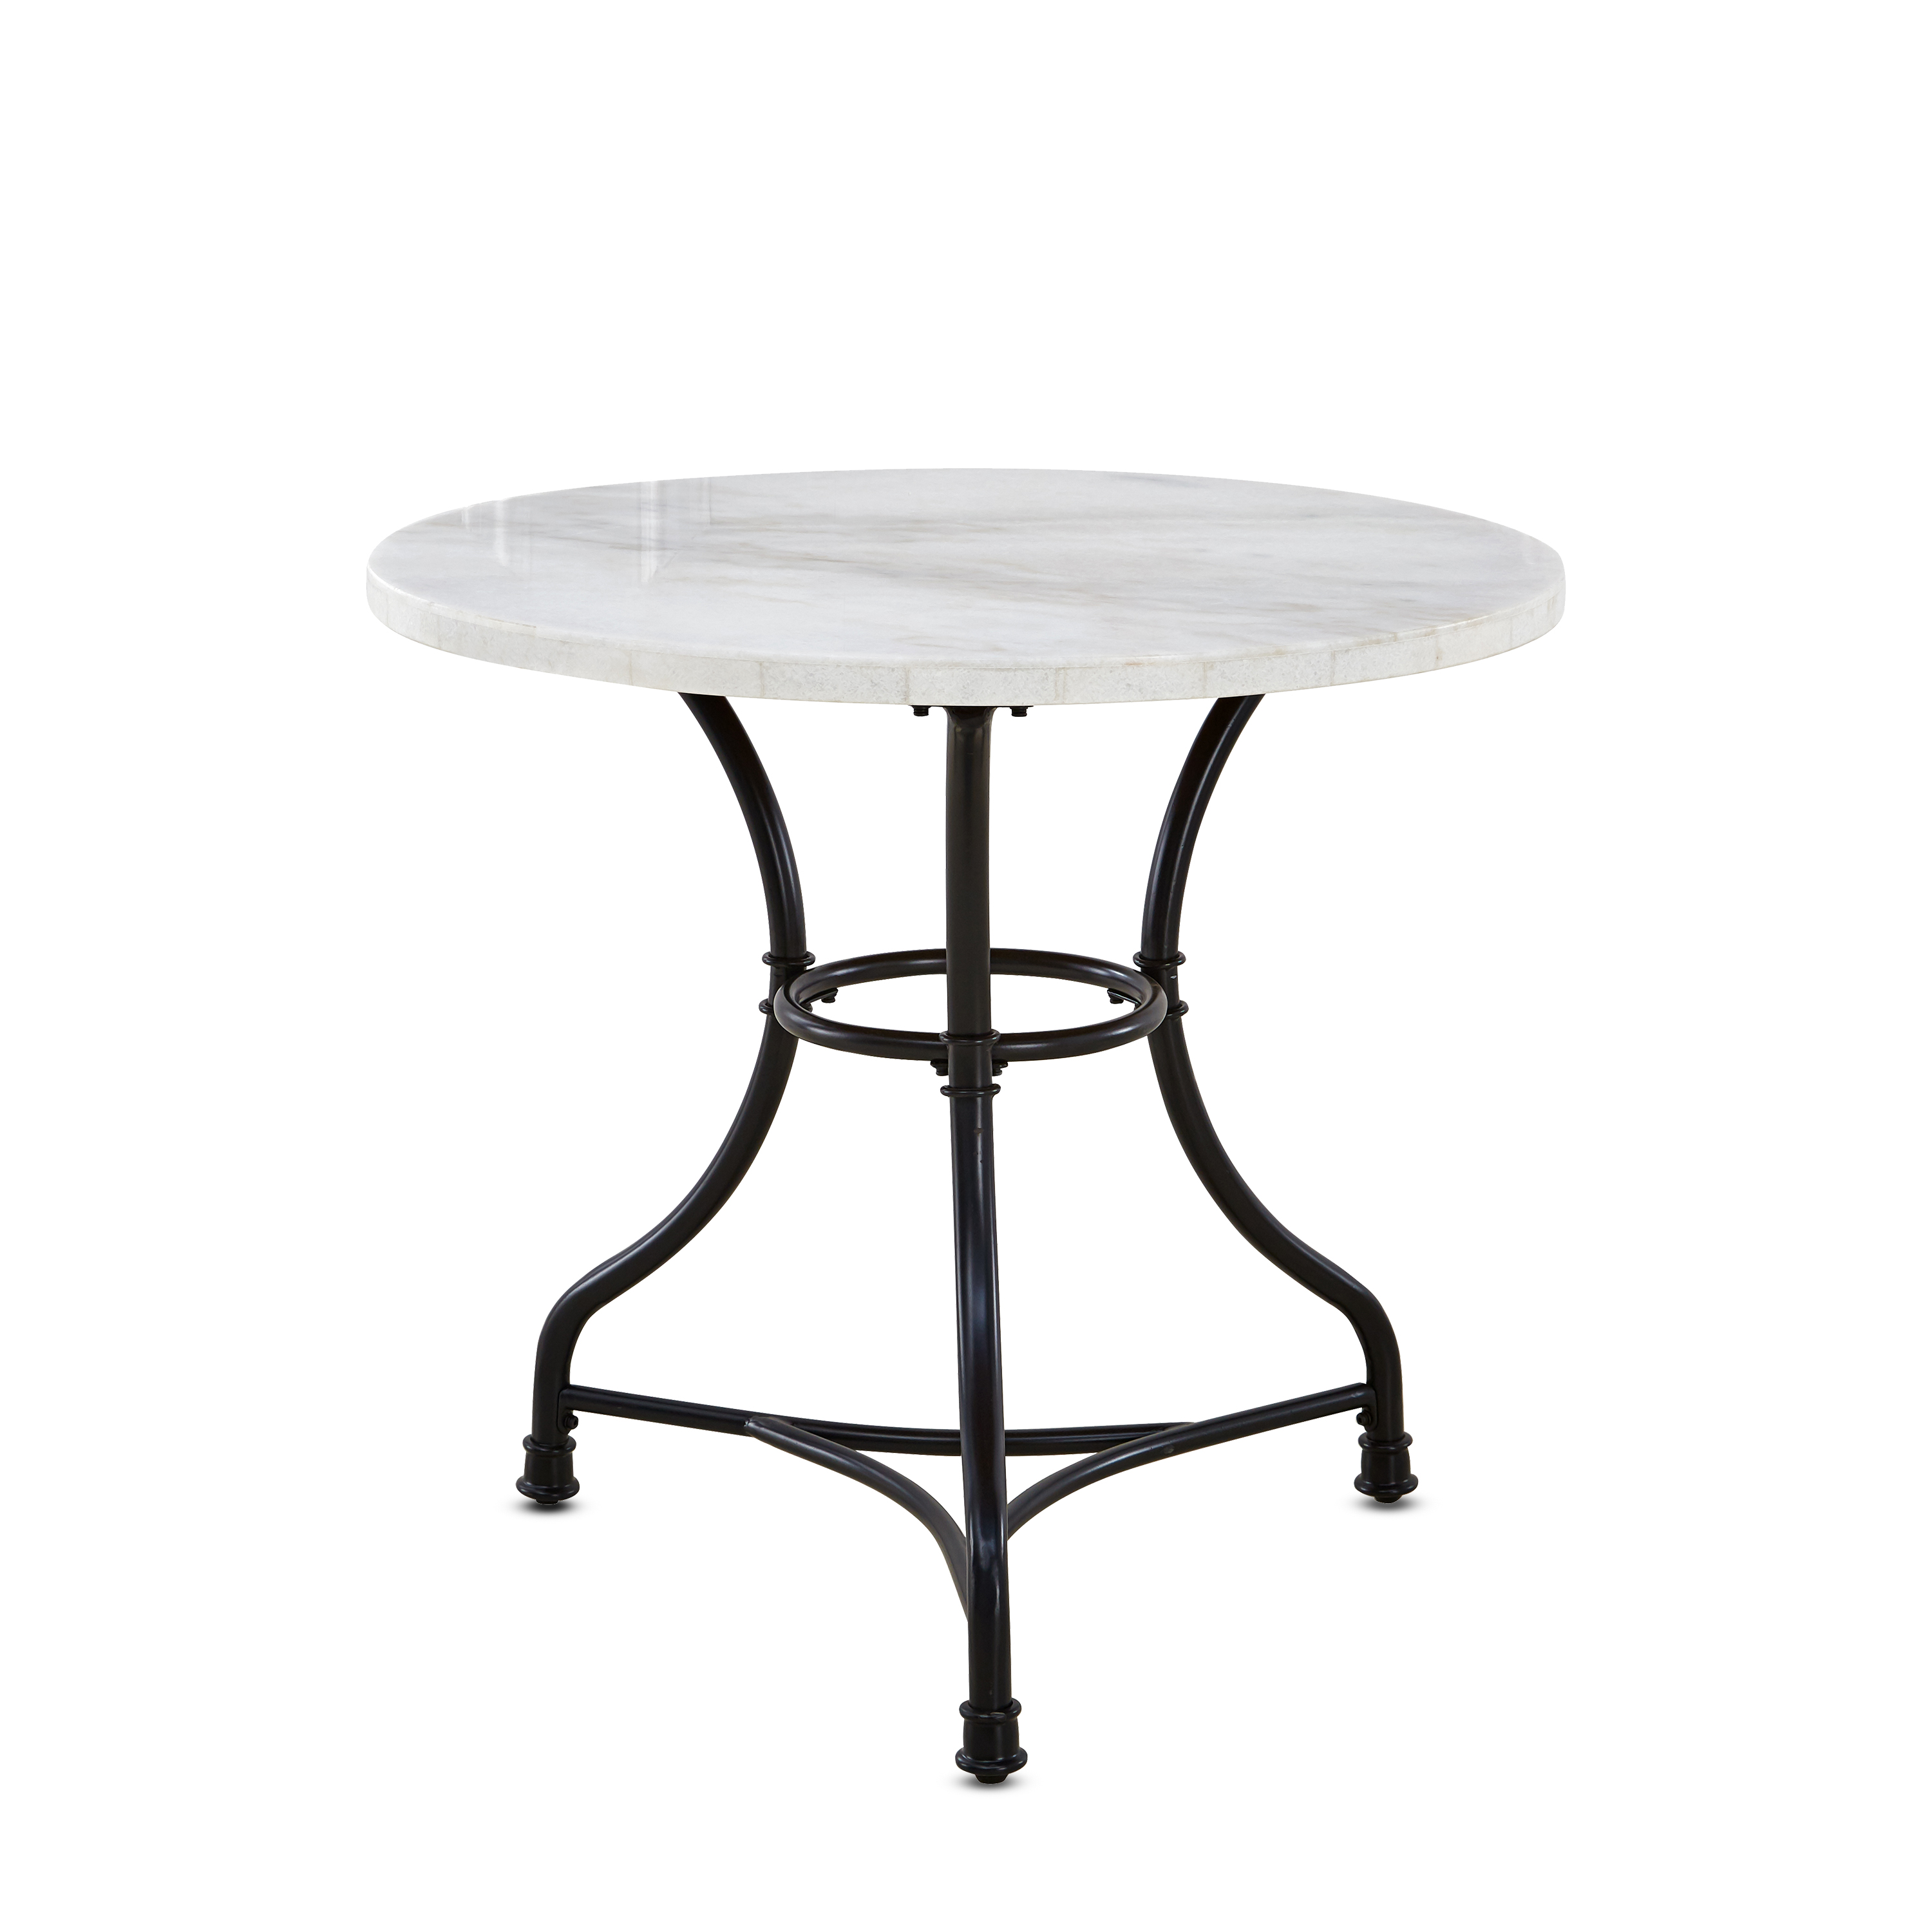 Moderne 3 Piece Round Dining Set with Charcoal Chairs by Chateau Lyon - image 4 of 10